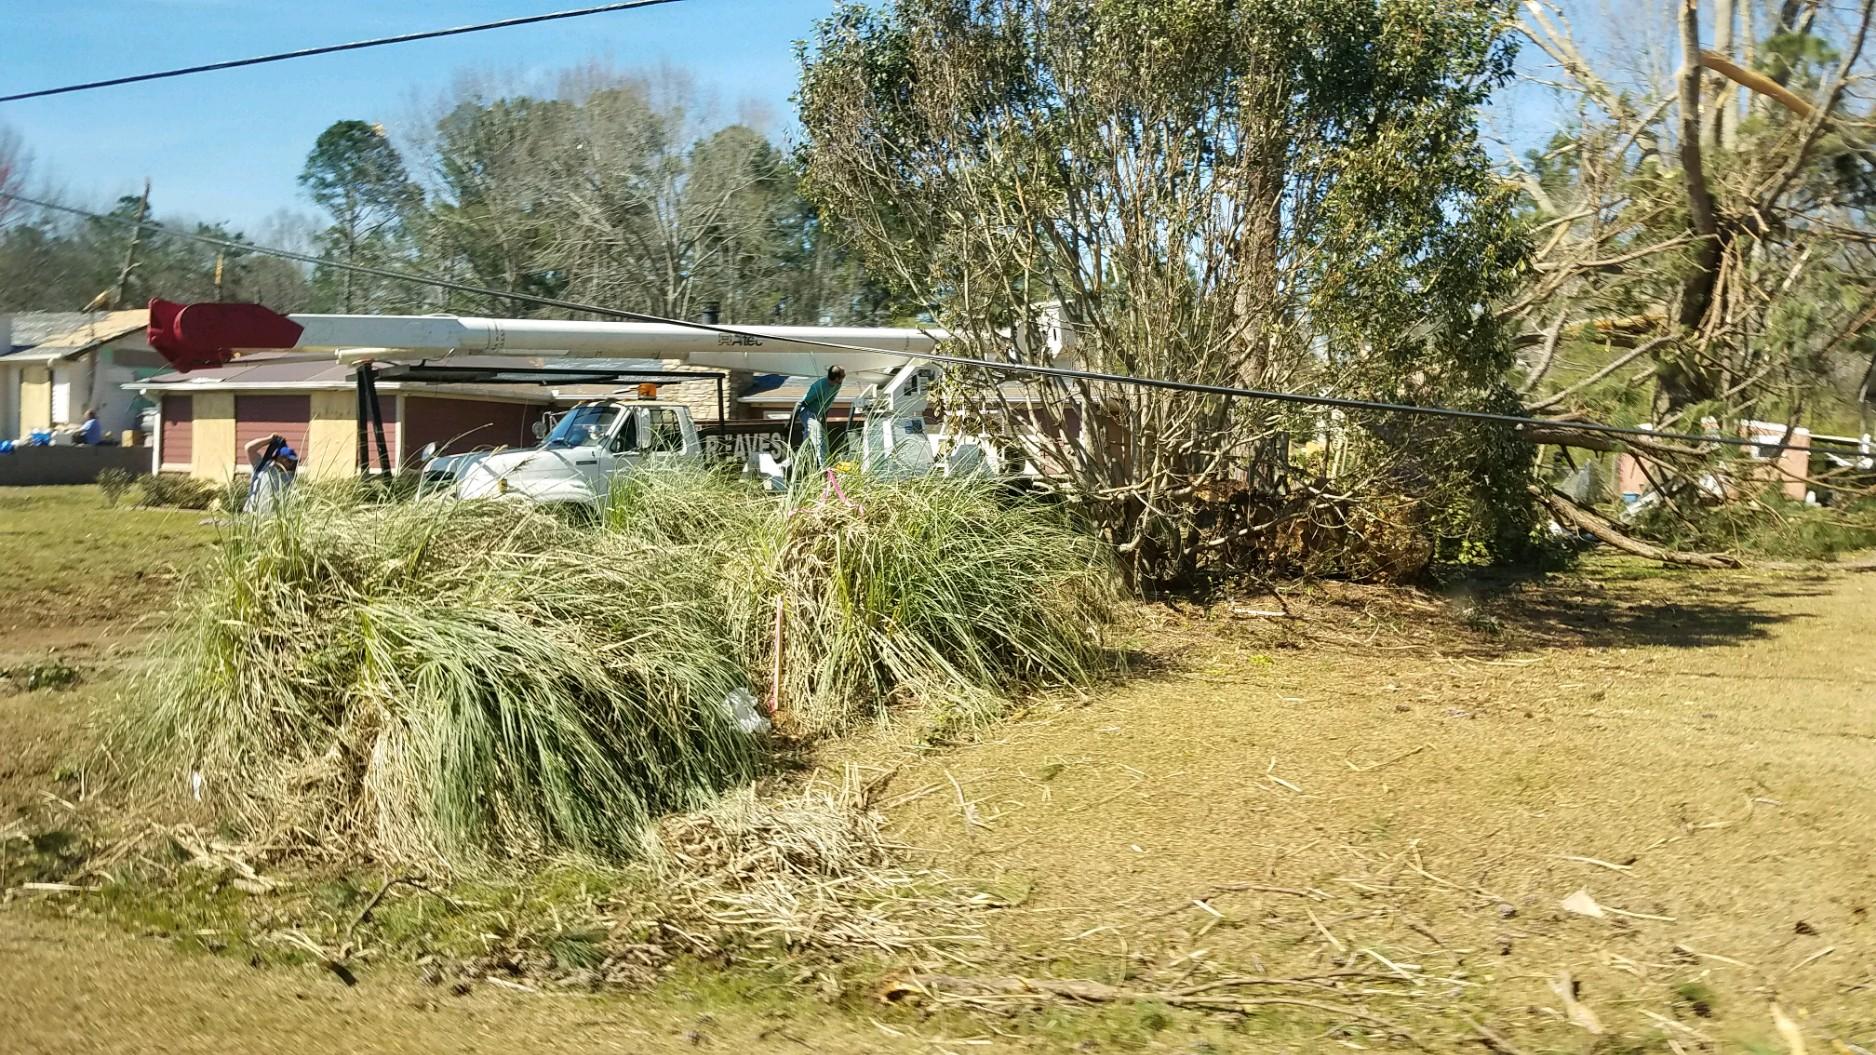 Bushes and trees blown over in front of a house after a tornado.